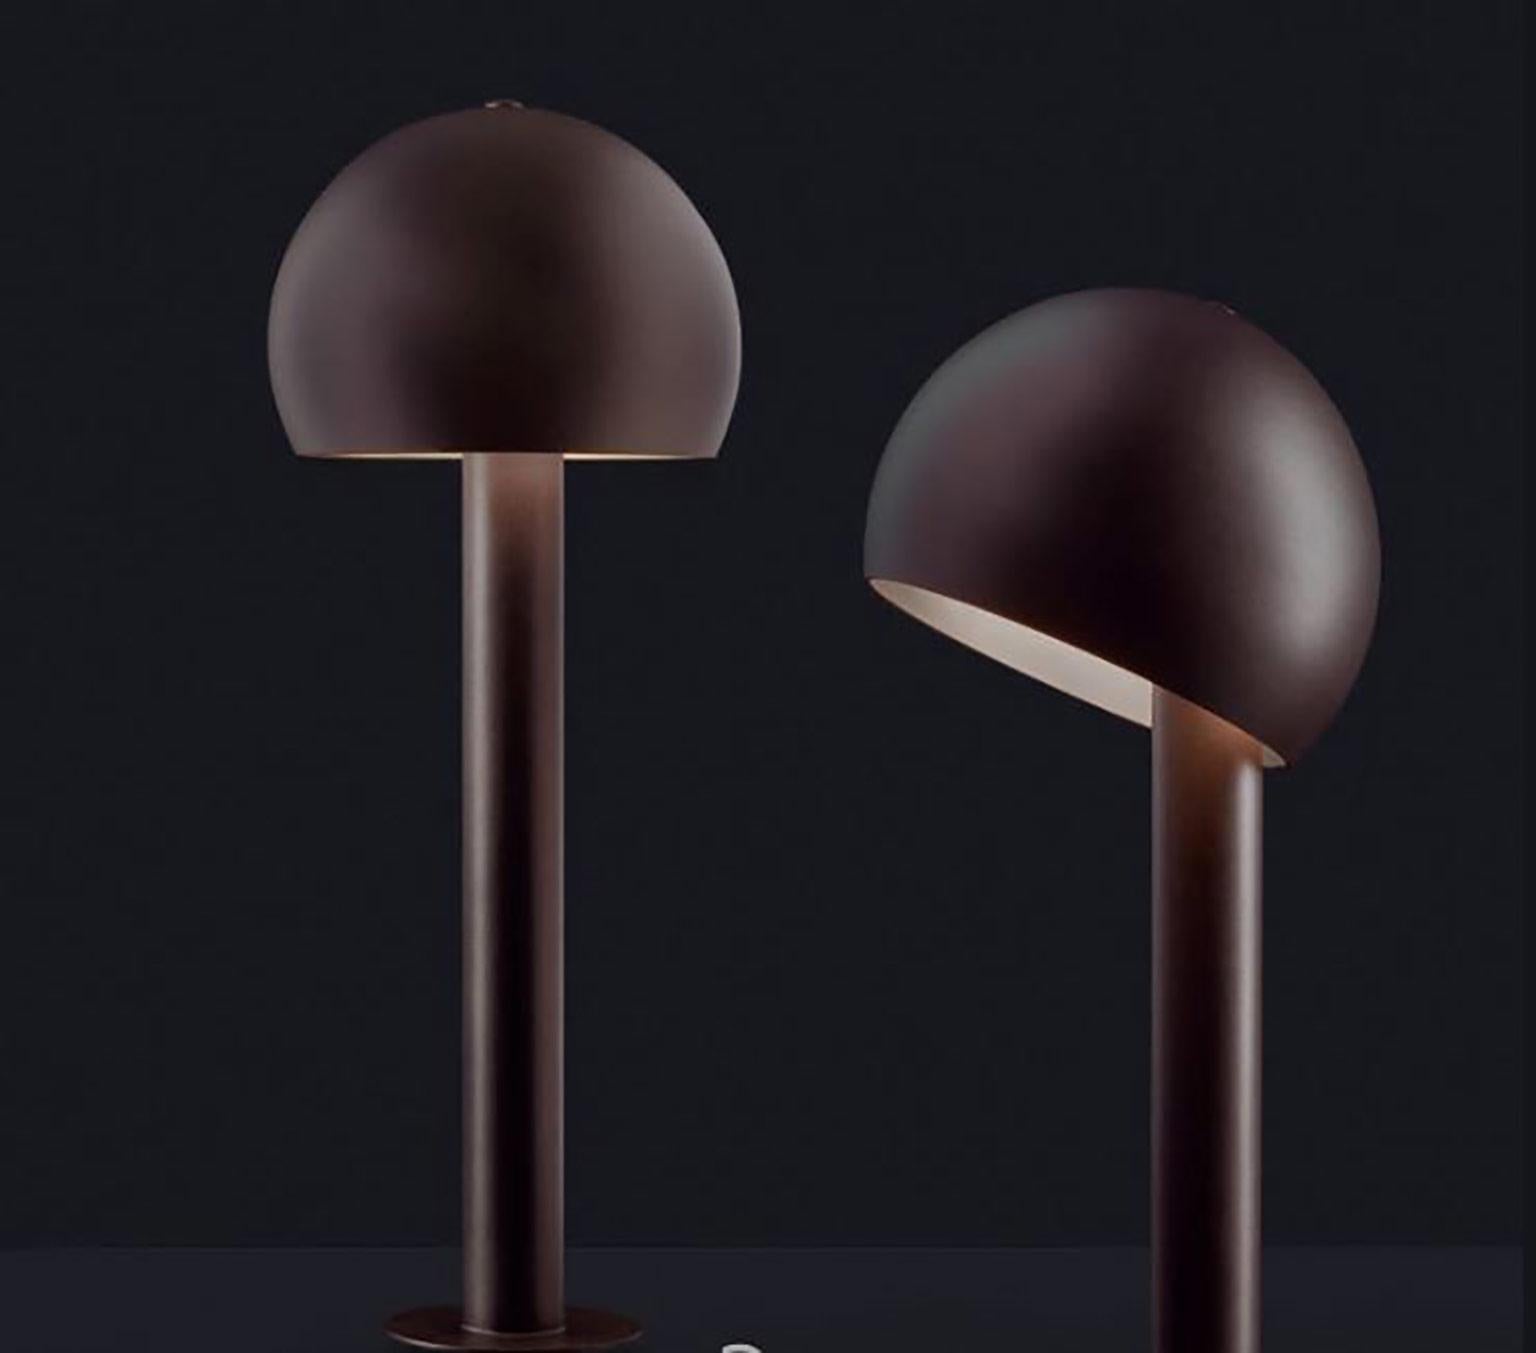 Otto outdoor lamp by Federica Farina for Oluce. The lamp has a sleek dome shape that can be directed in any direction. A mounting disc is attached to the base from which a cylindrical stem arises and at the top of the stem, the adjustable hemisphere